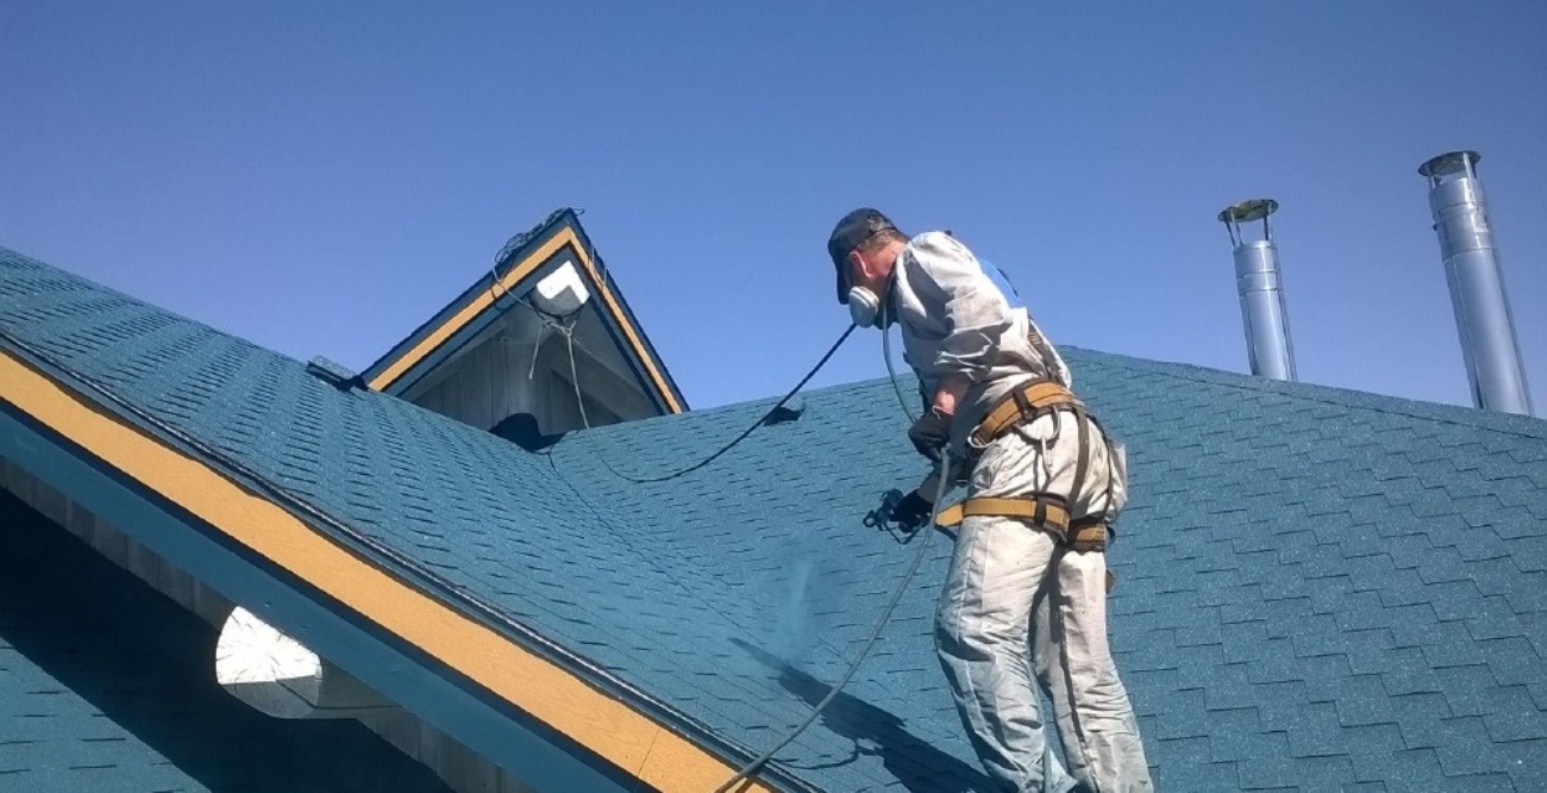 roofing adelaide